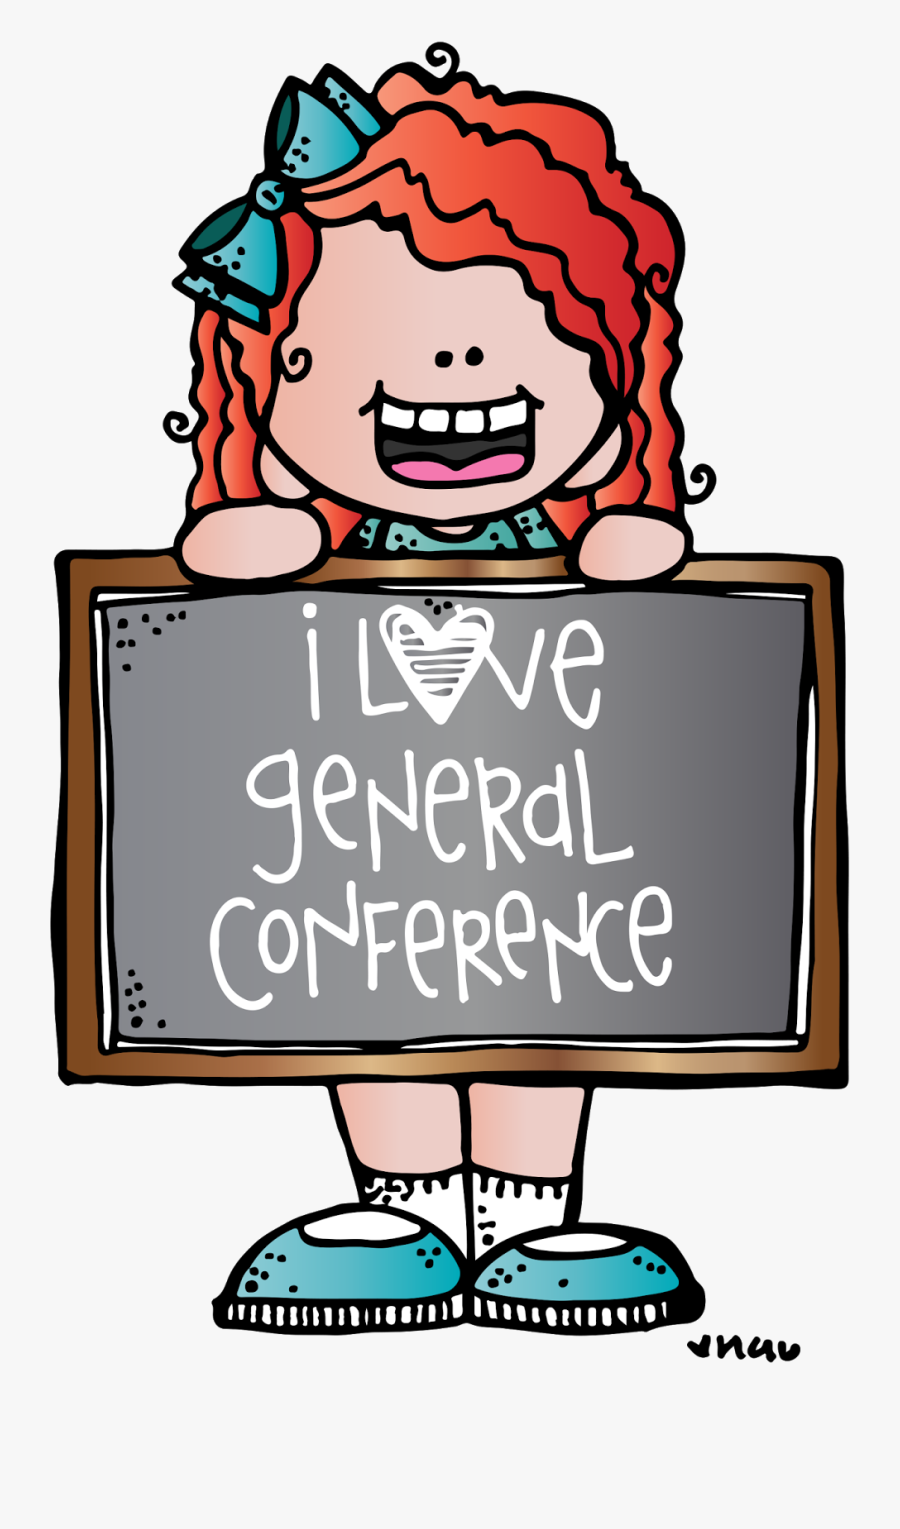 Lds Clipart Of General Conference, Transparent Clipart